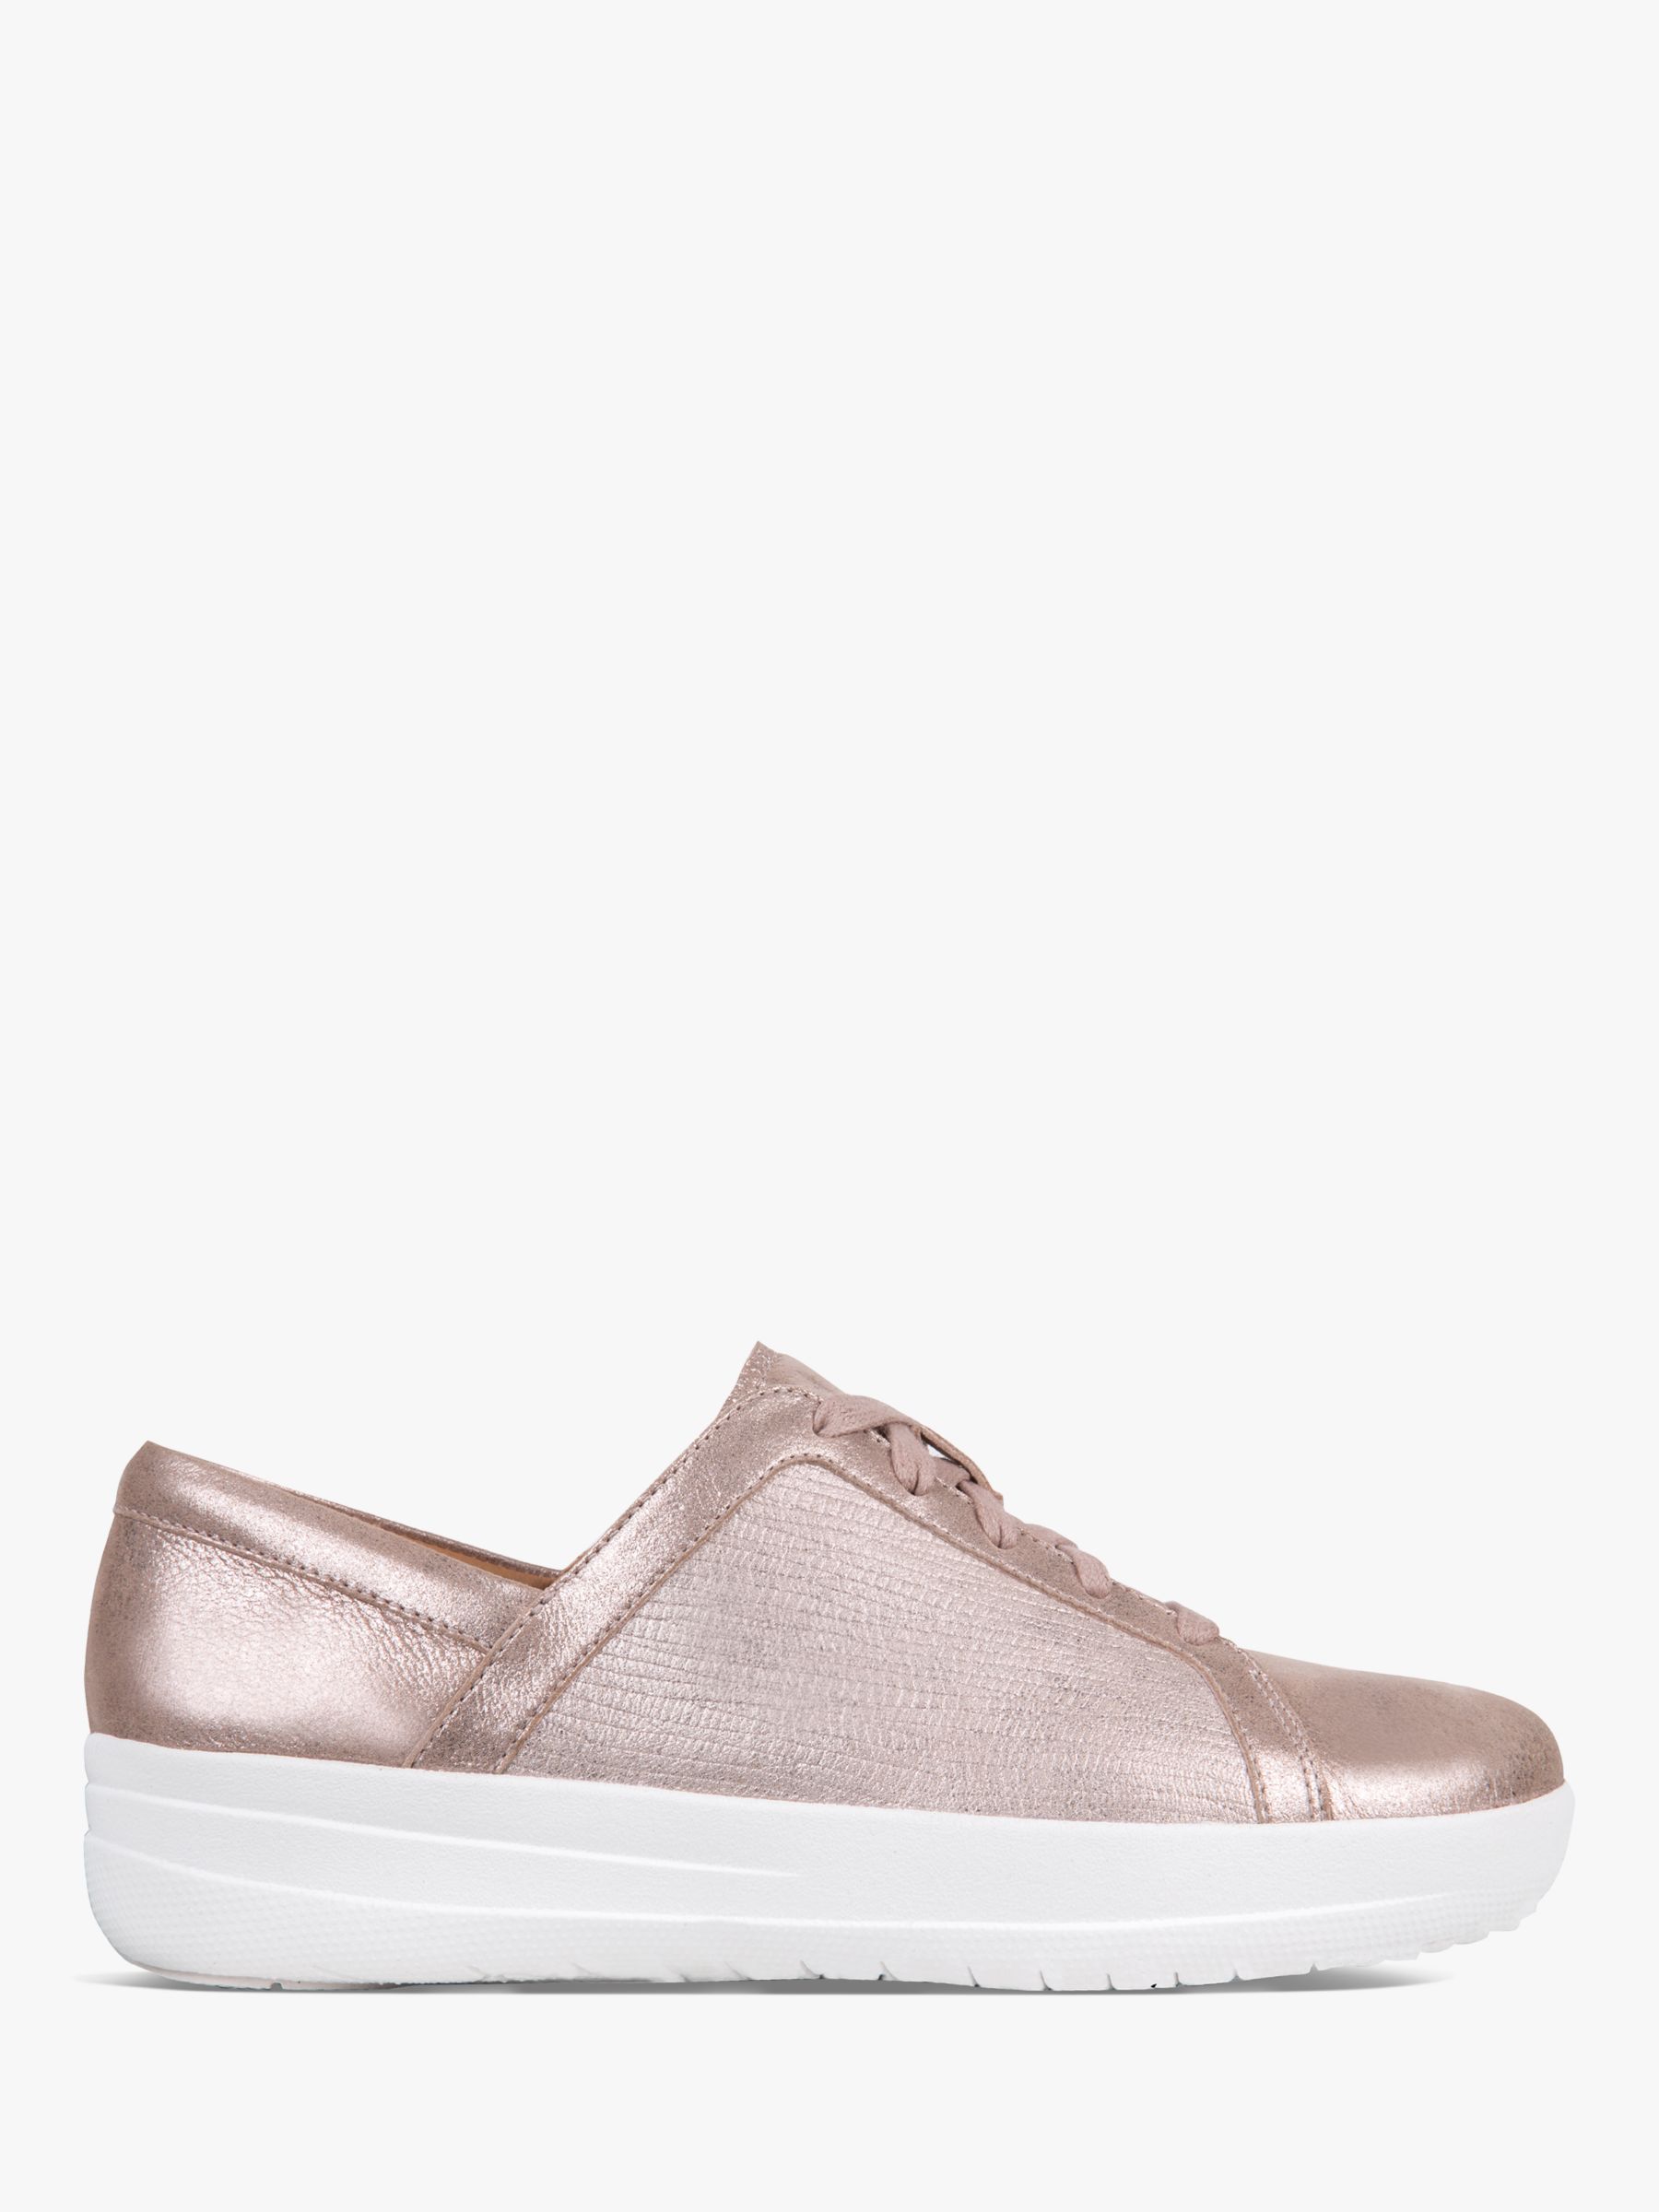 FitFlop F-Sporty Textured Metallic Lace Up Trainers, Taupe Leather